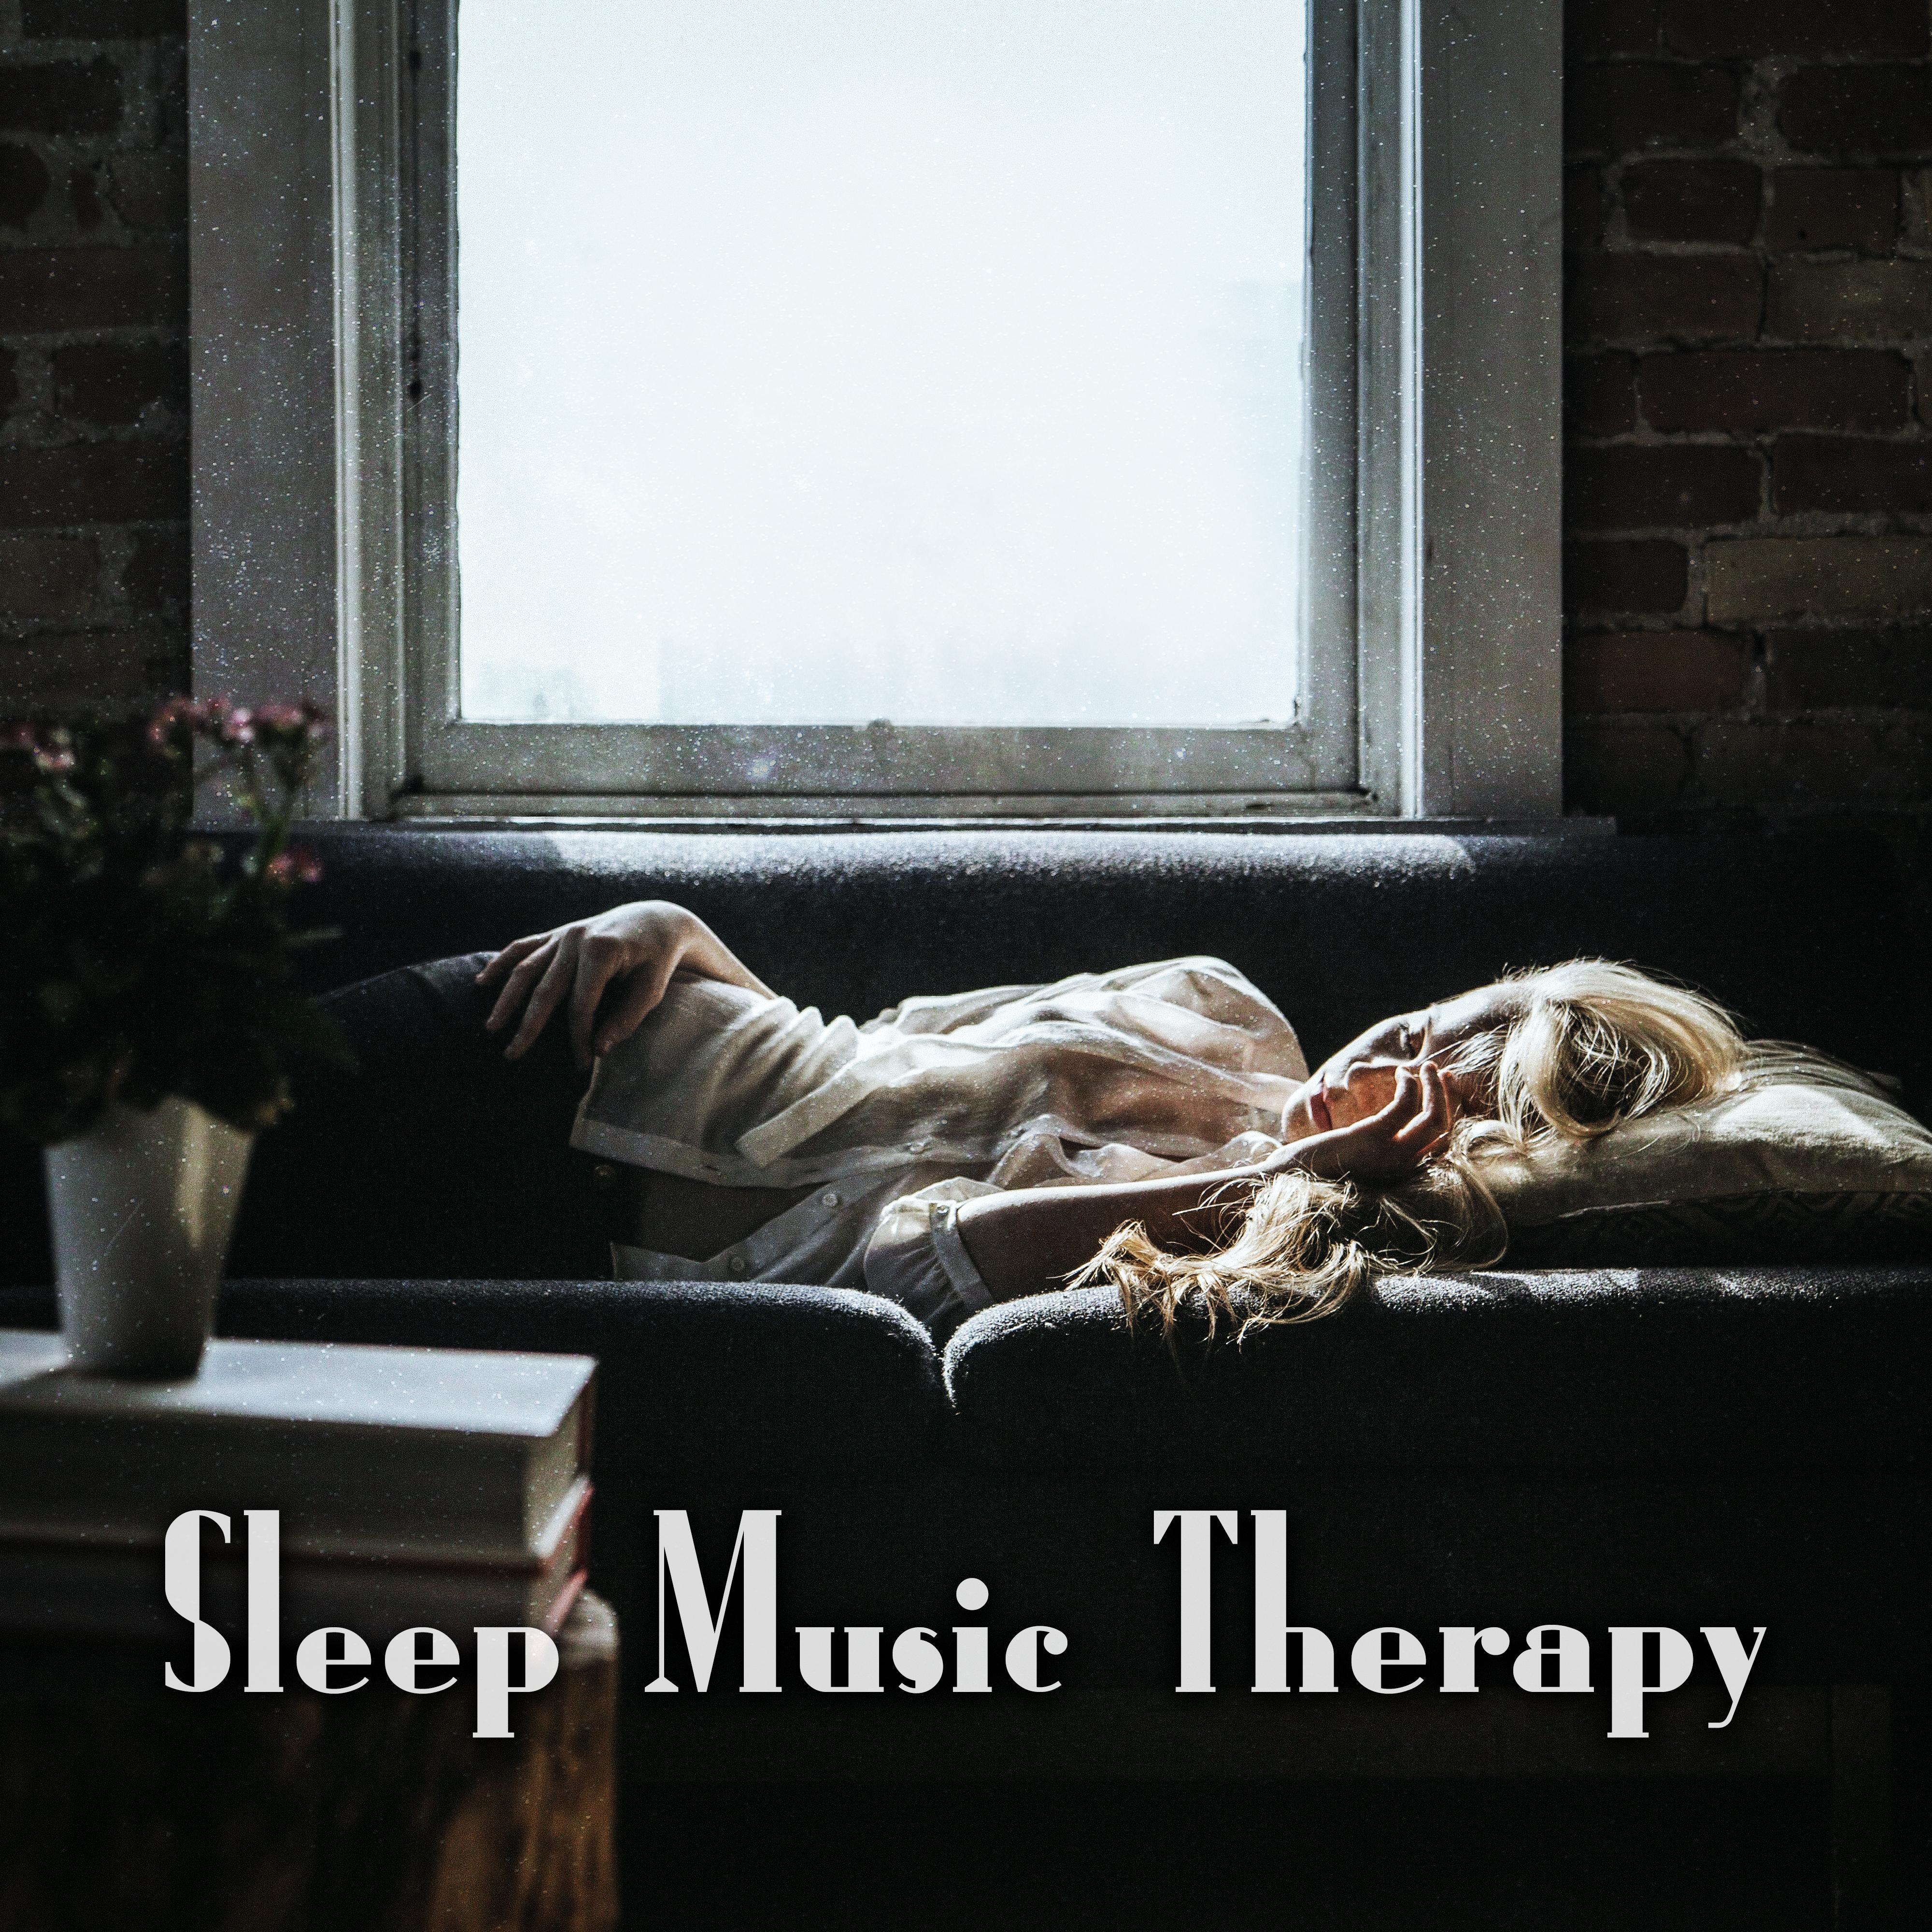 Sleep Music Therapy  Nature Sounds, Music for Deep Sleep, Pure Relaxation, Ocean Waves, Cure Insomnia, Rest